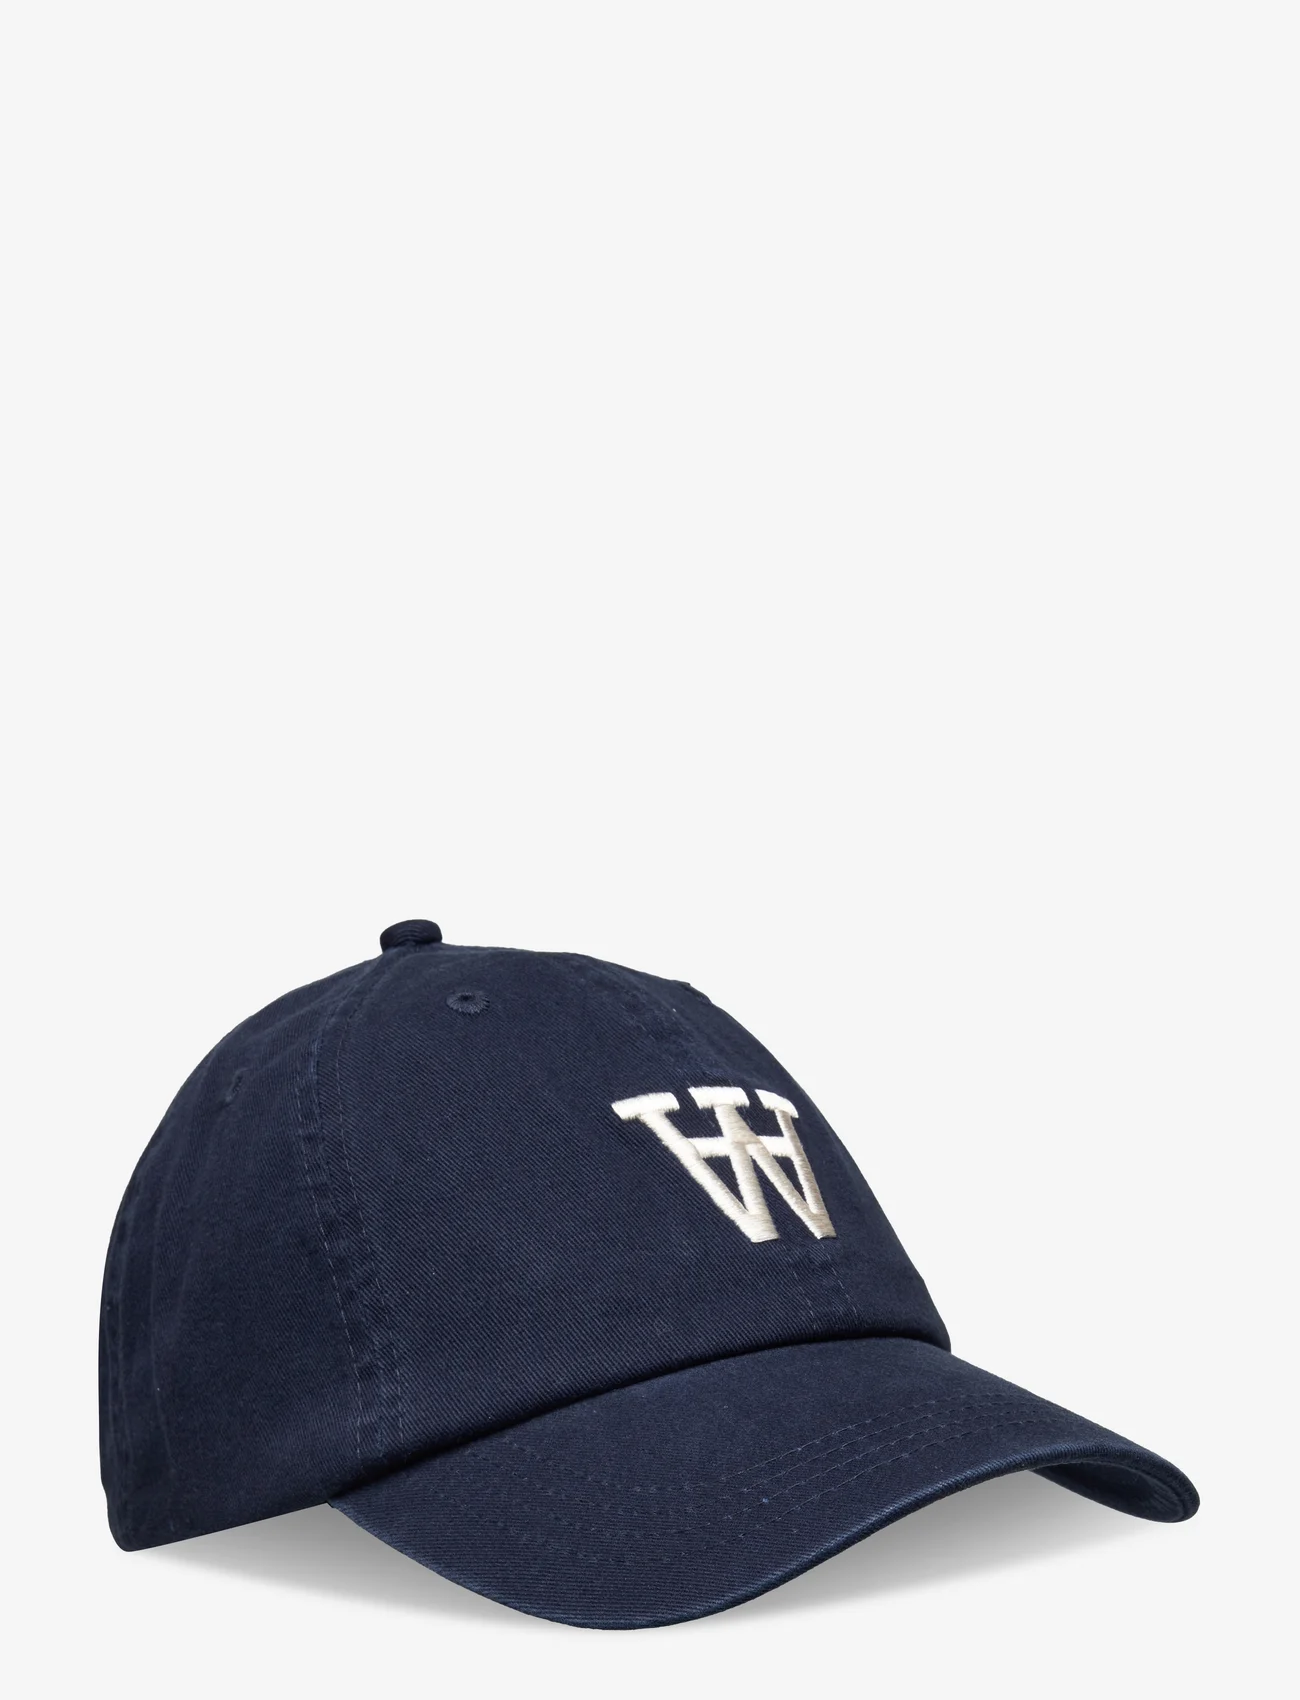 Double A by Wood Wood - Eli embroidery cap - kappen - navy - 0